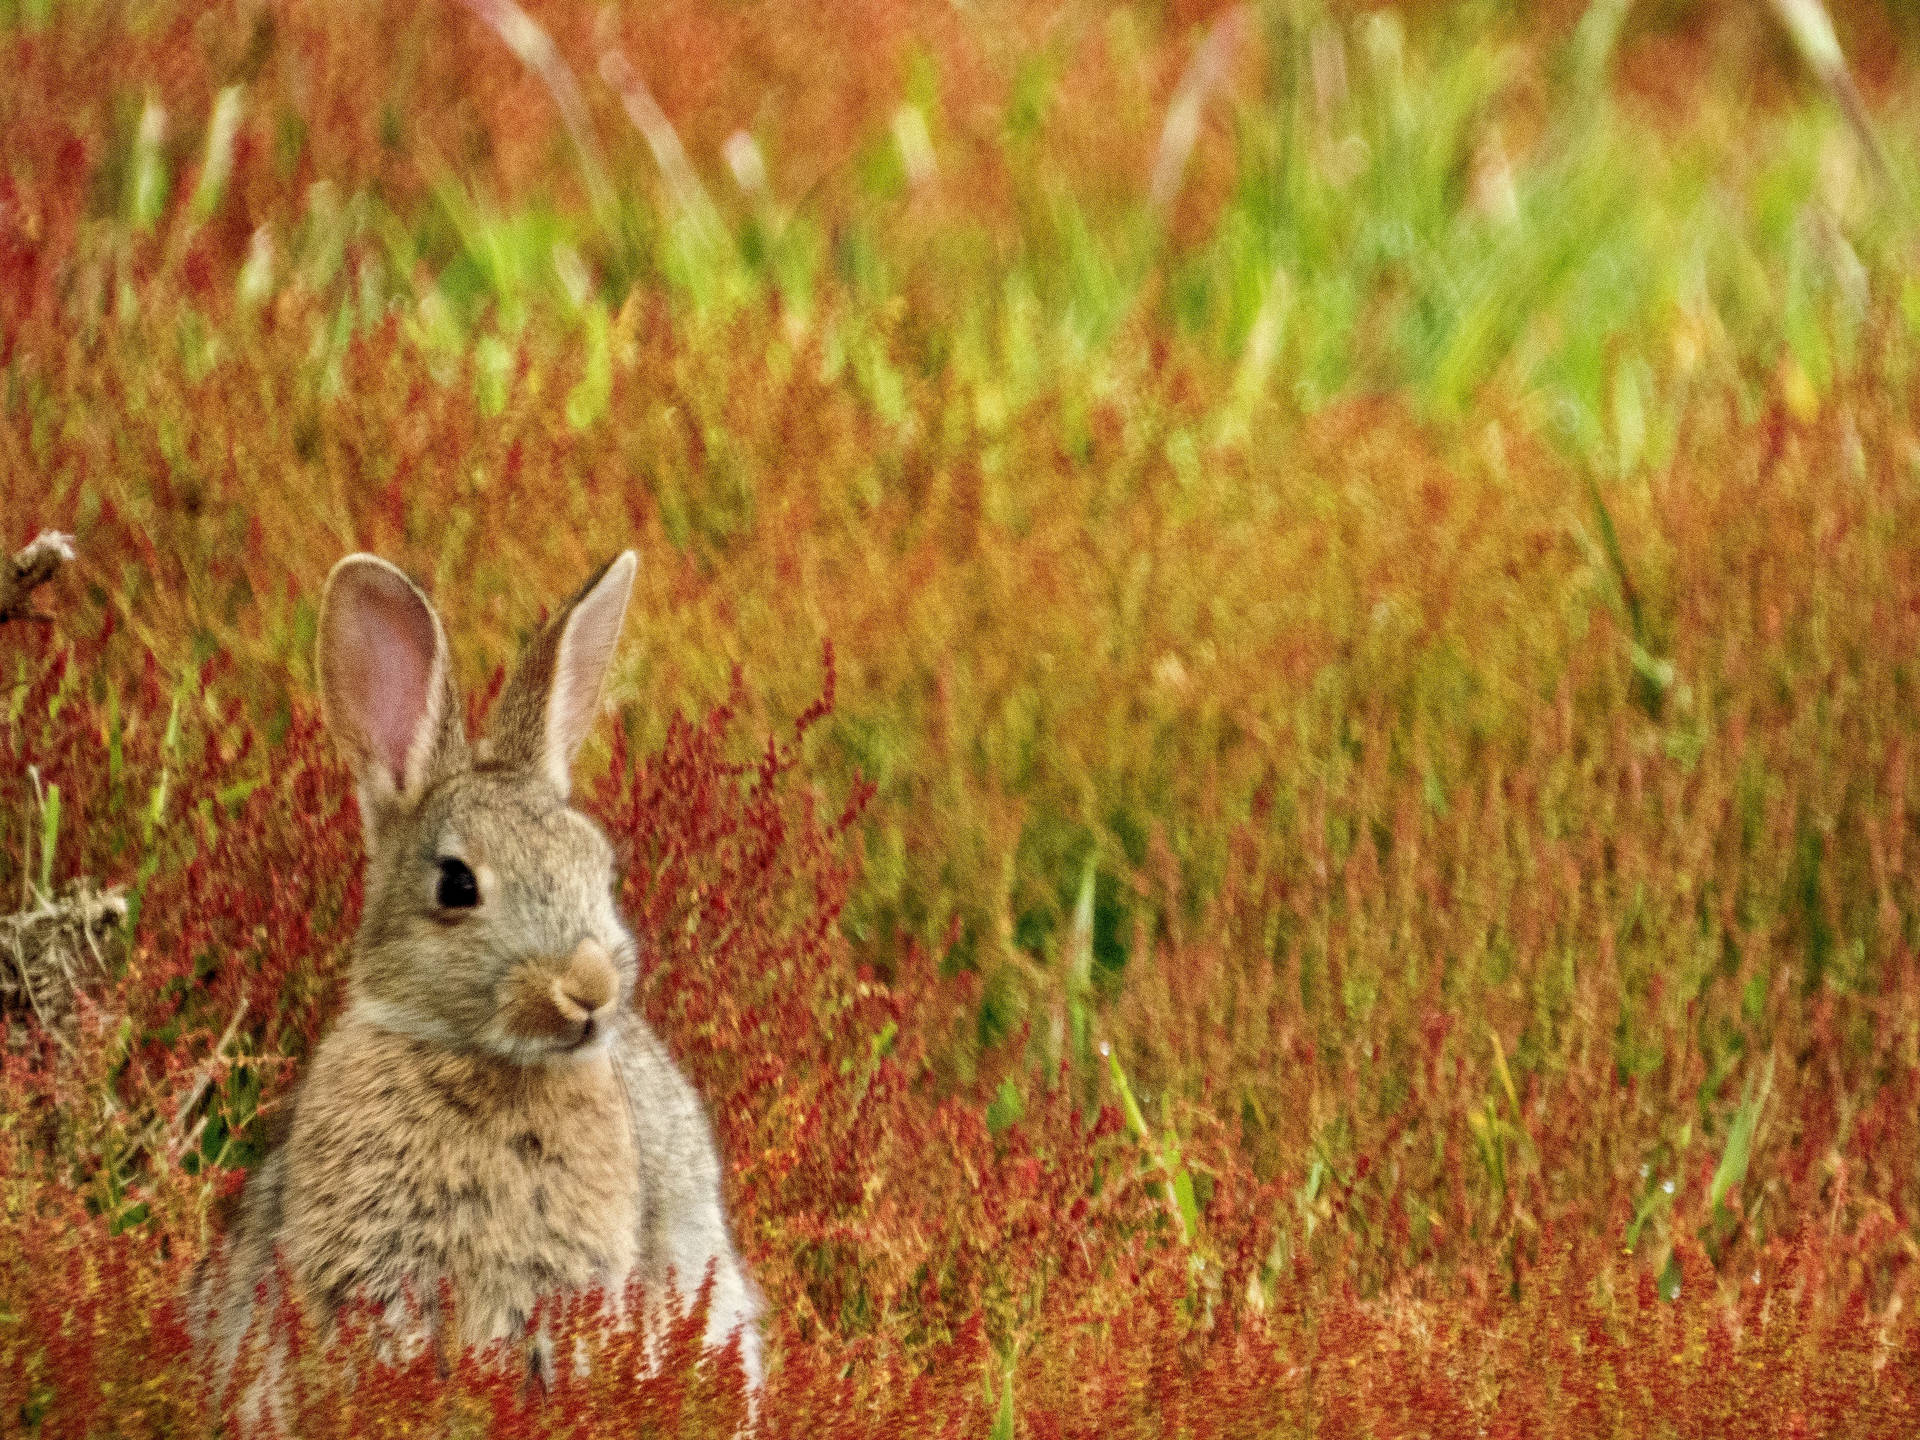 A Brown Bunny In A Meadow Of Bright Orange Flowers Background